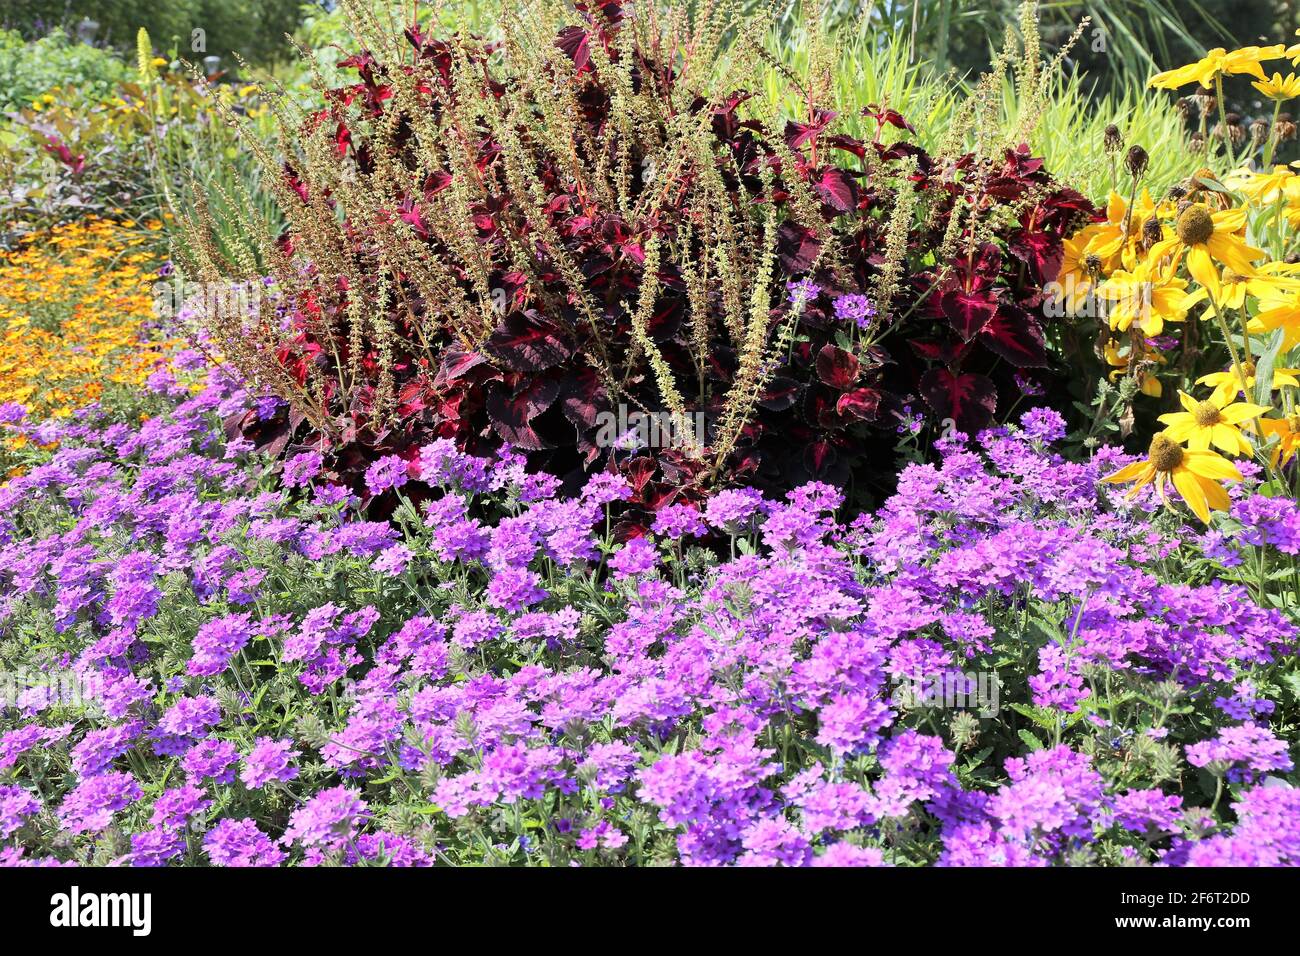 Neat and tidy flower garden. Stock Photo